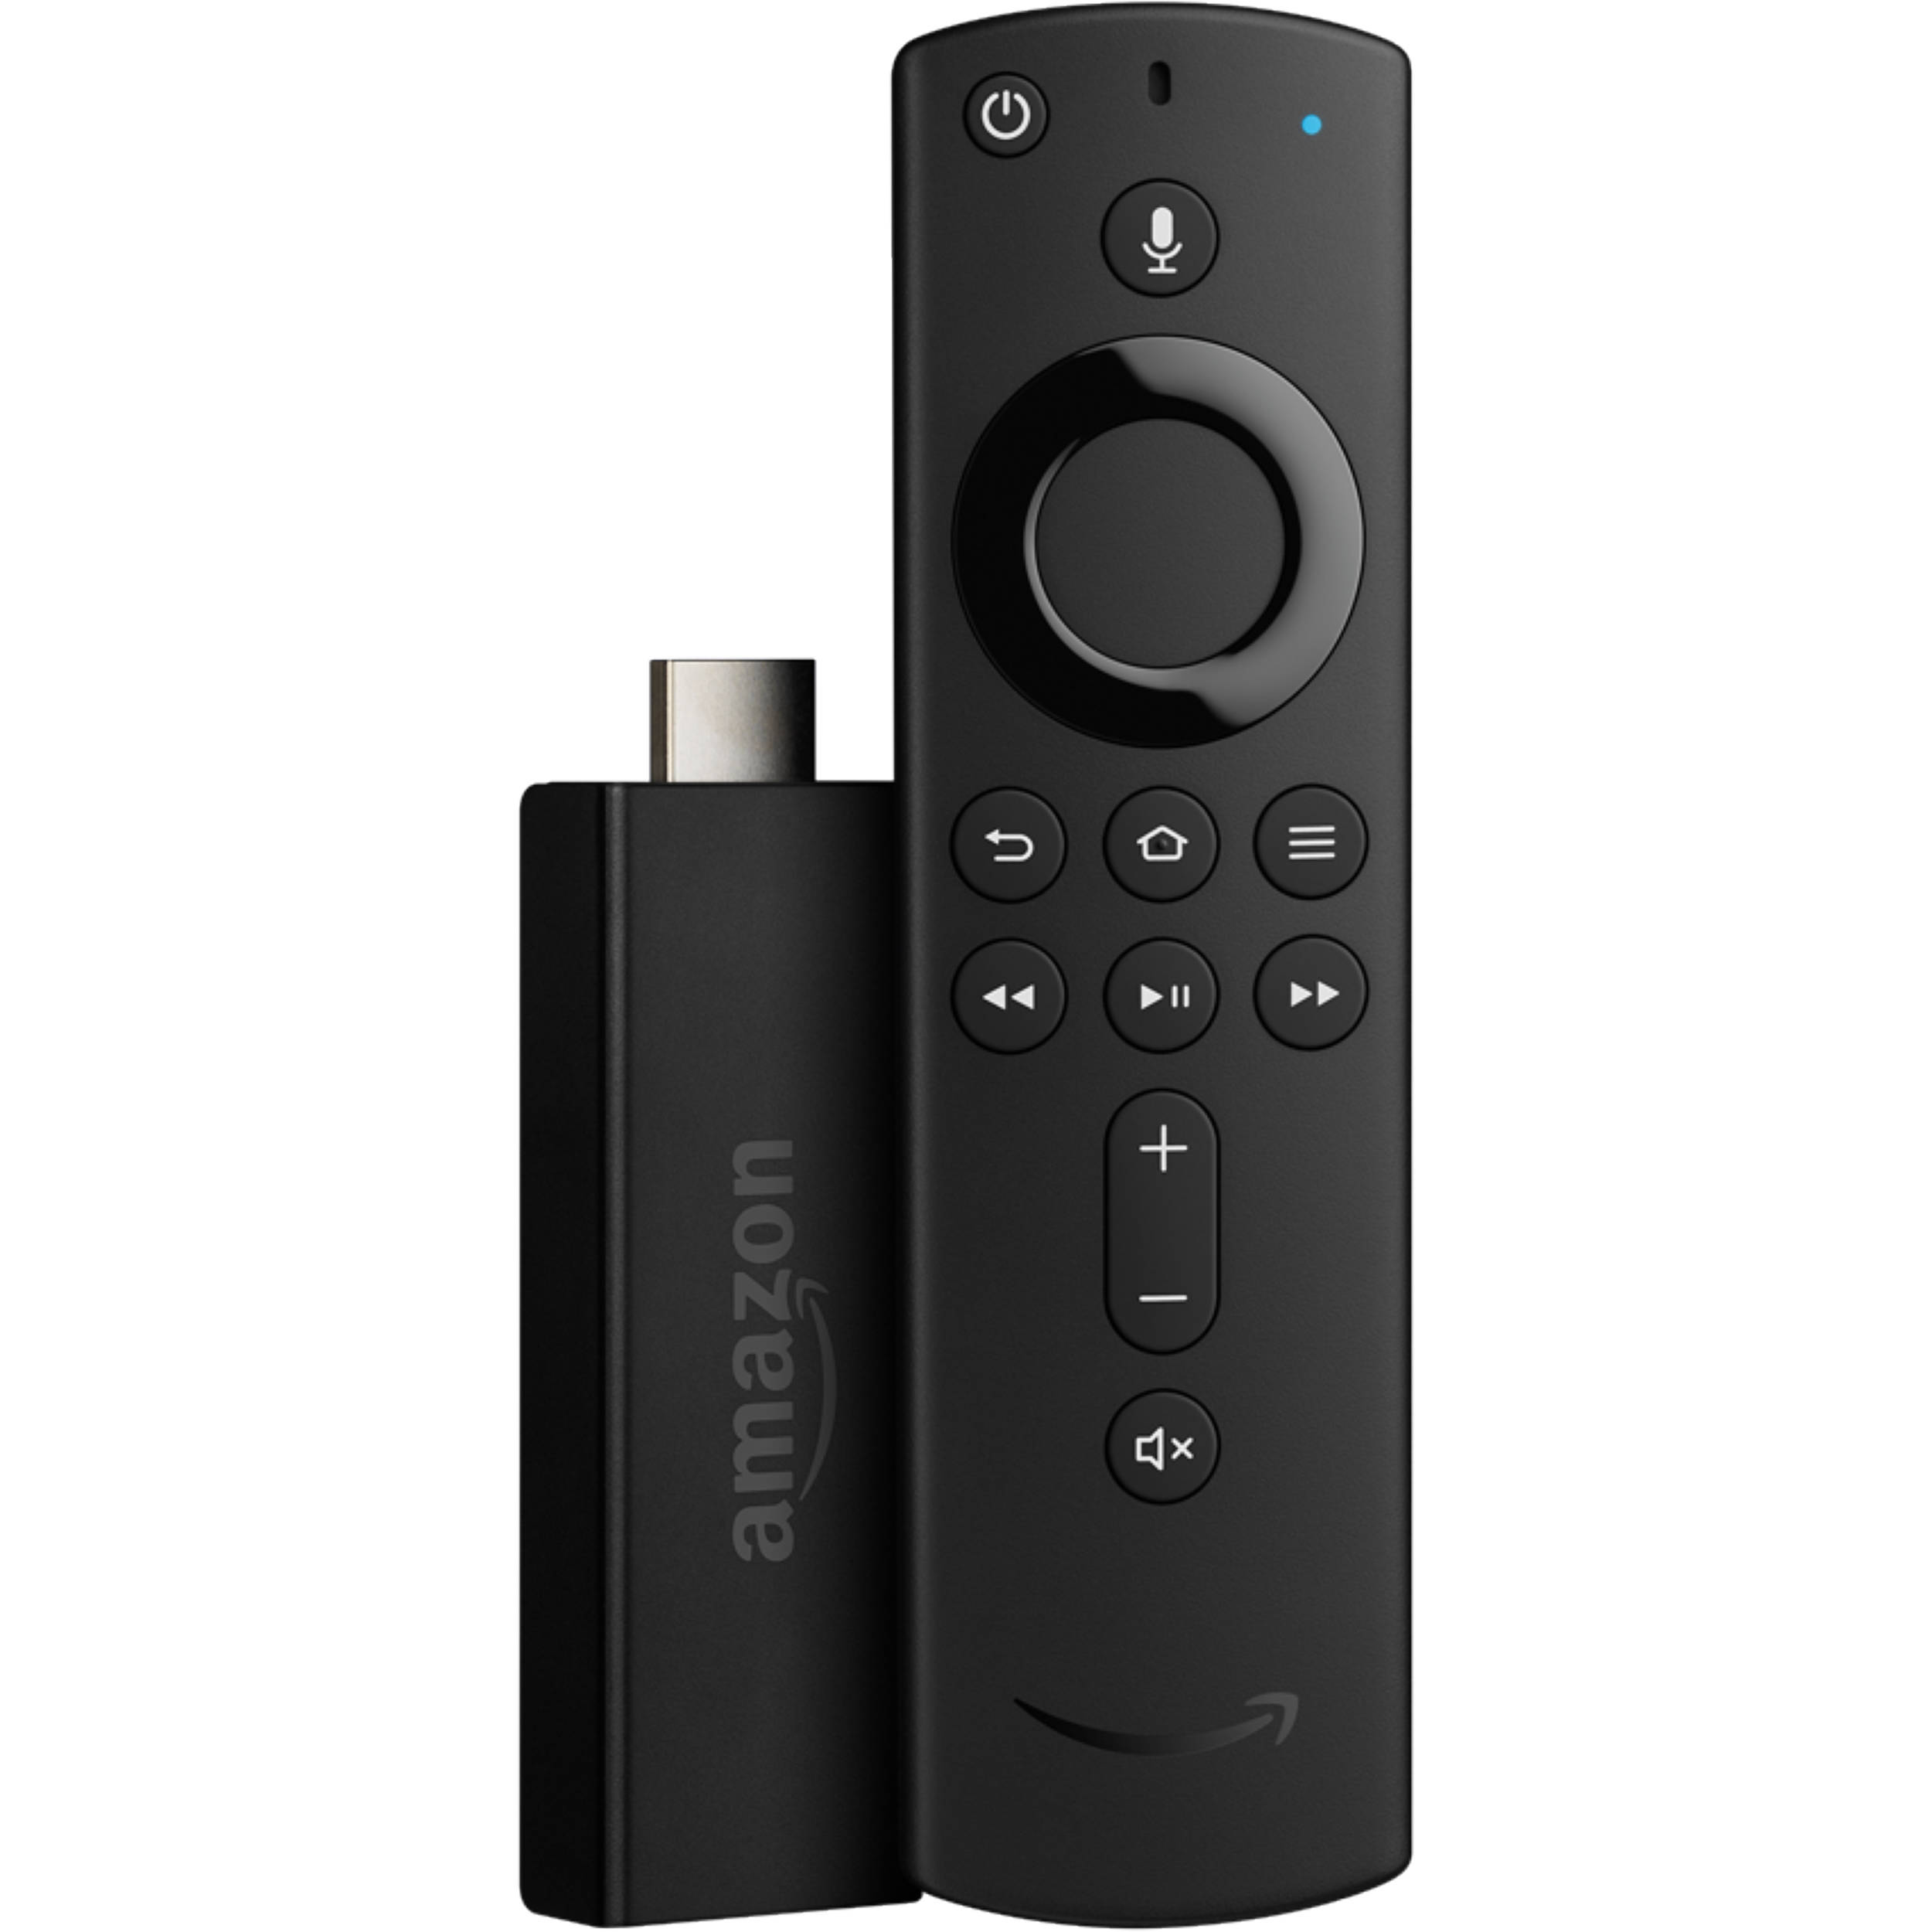 what is included on amazon fire stick